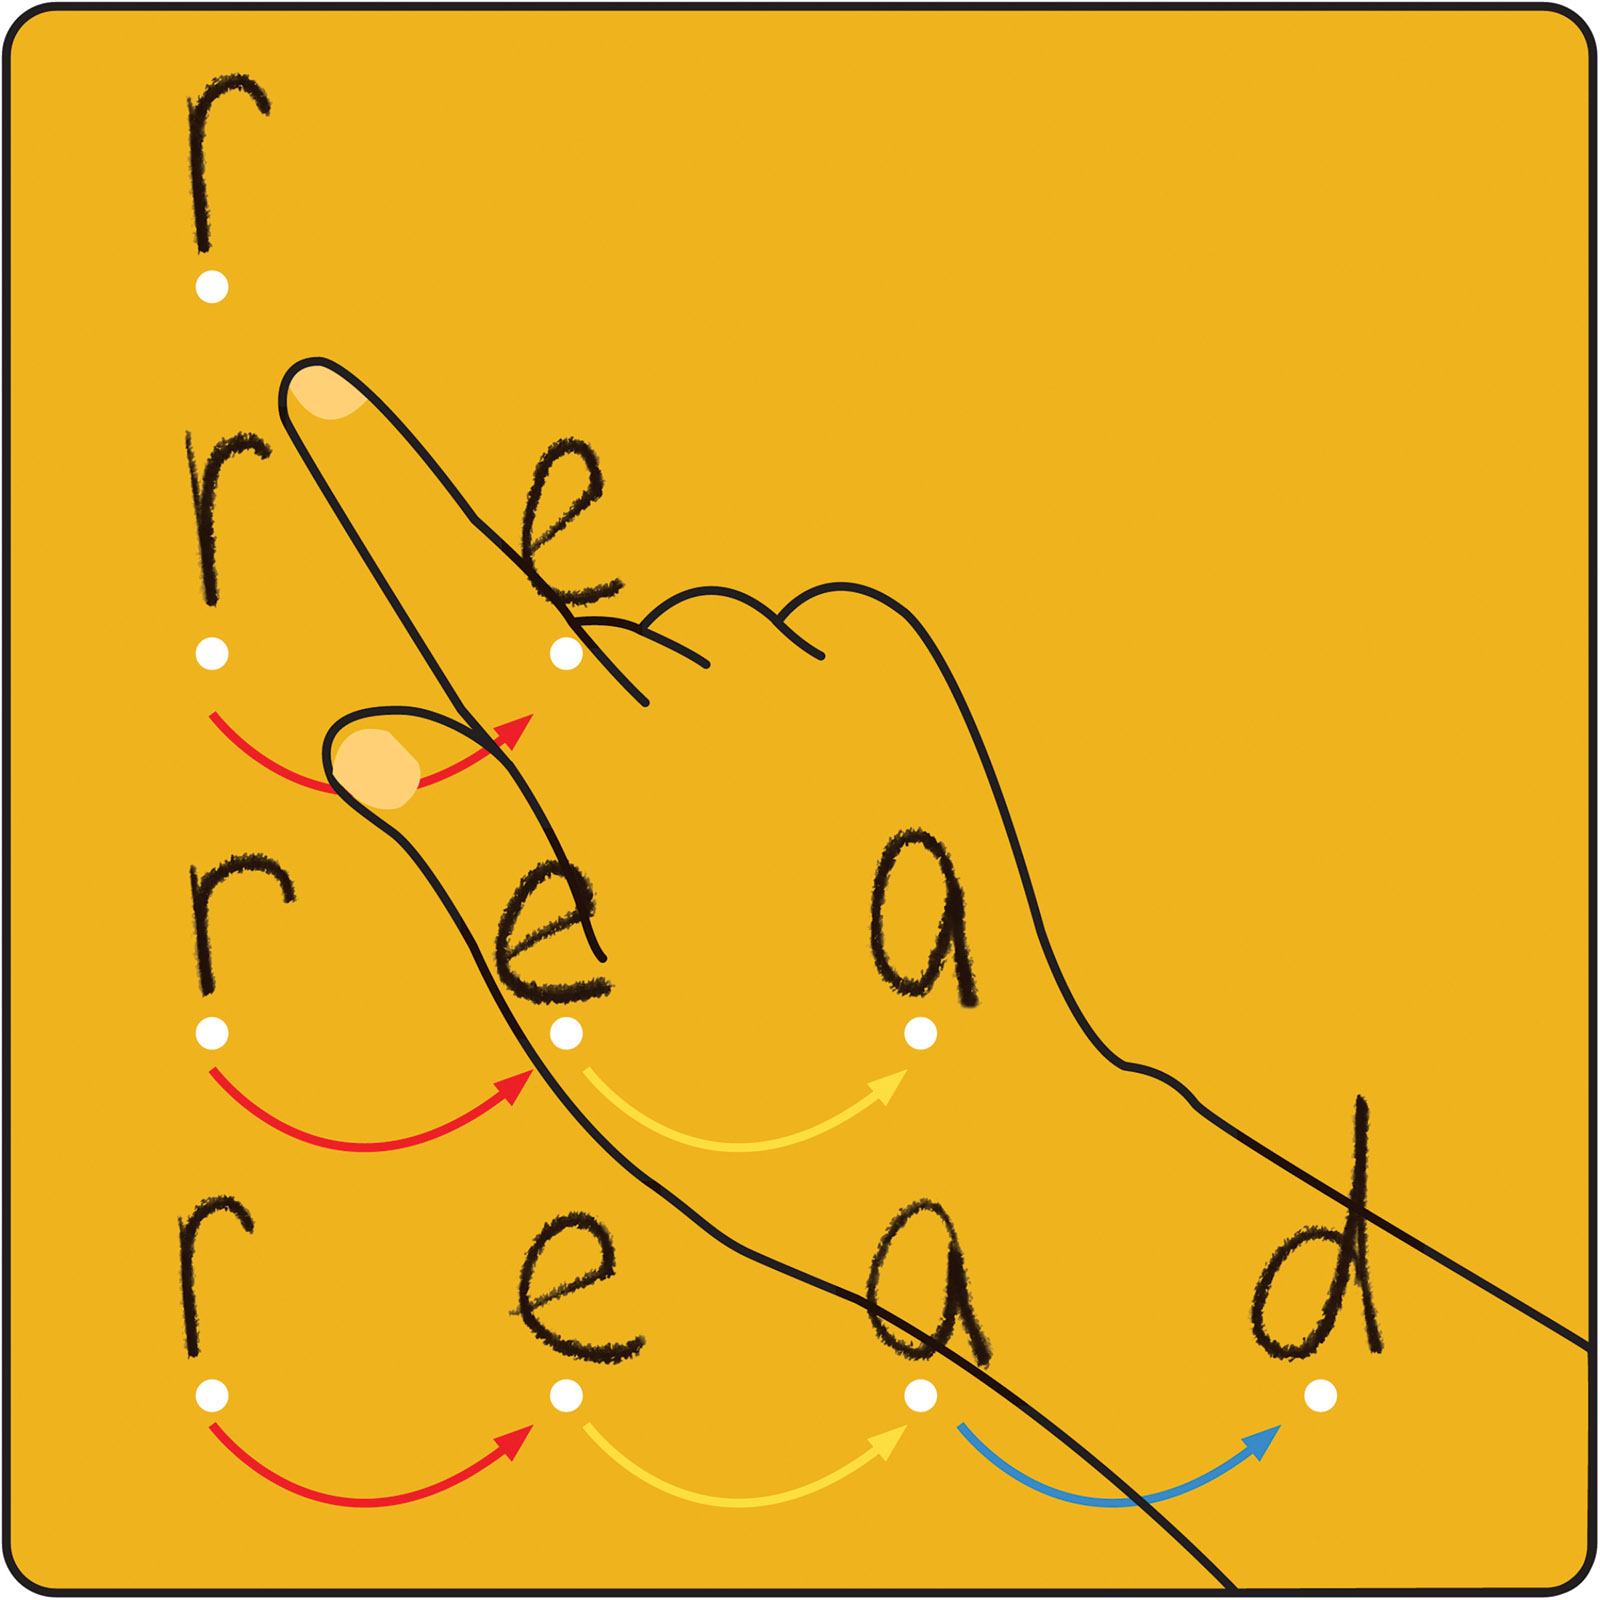 Illustration of a hand and index finger pointing to the letters r, e, a, d